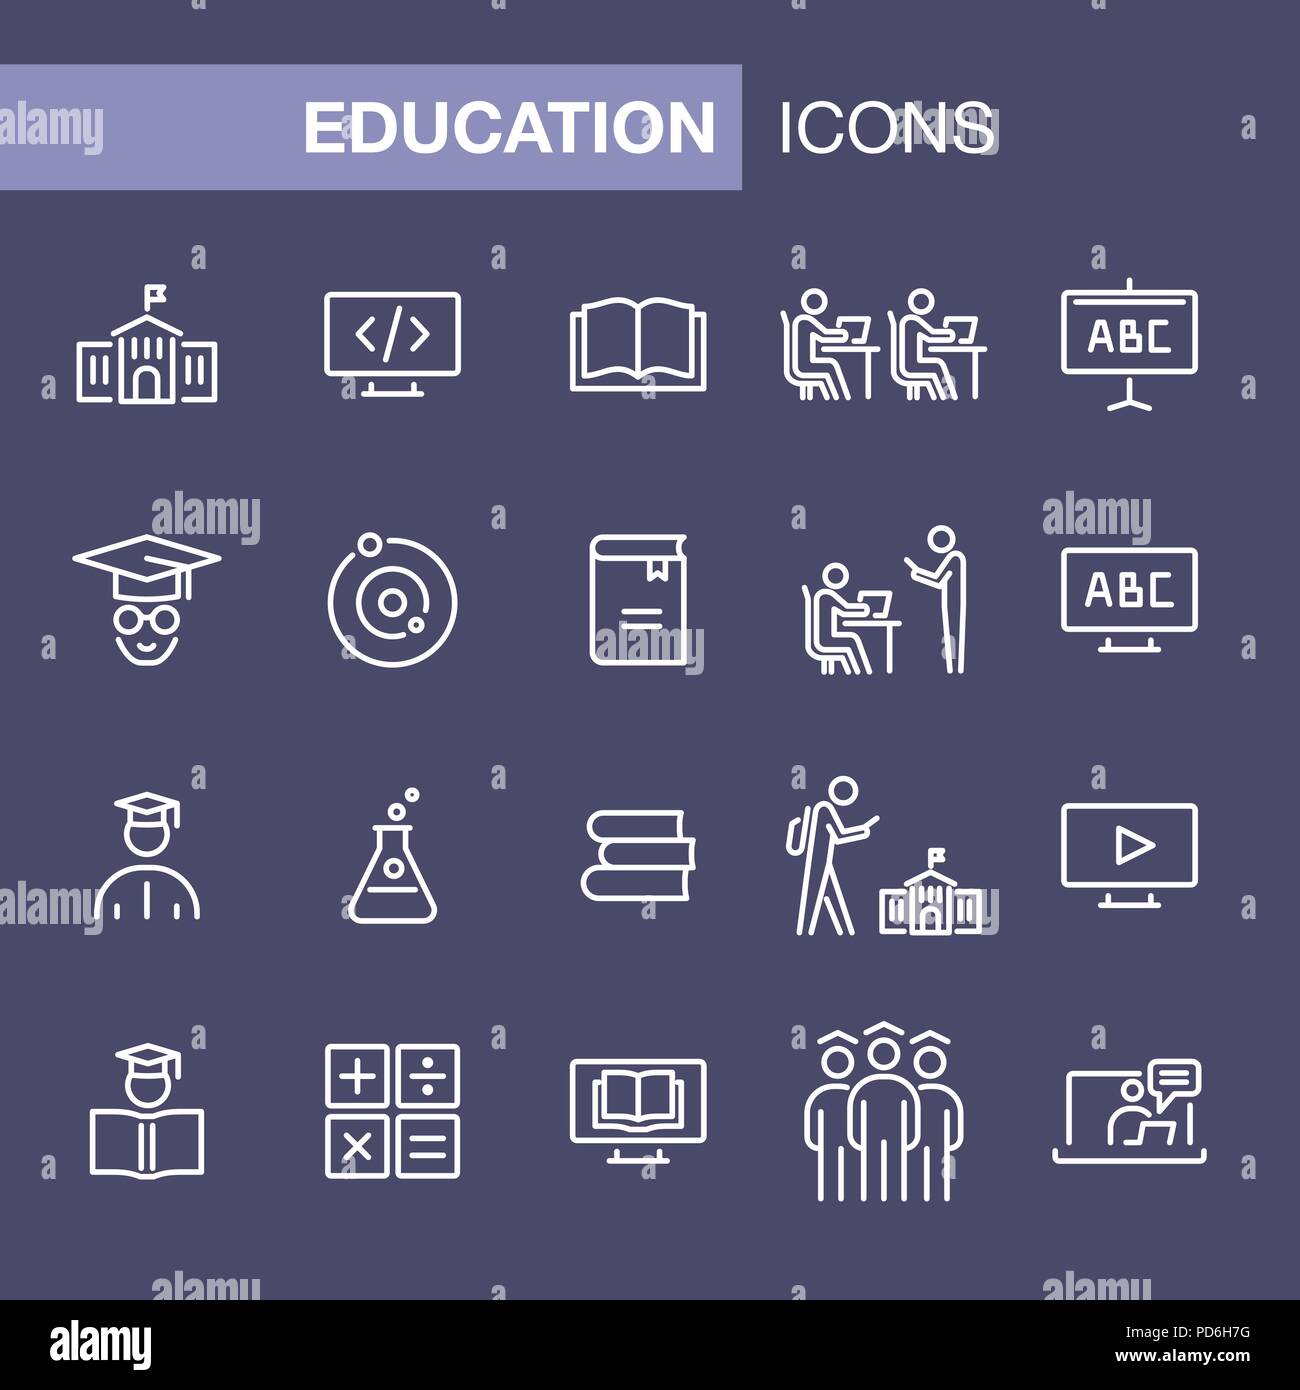 Education icons set simple flat style outline illustration. Stock Vector